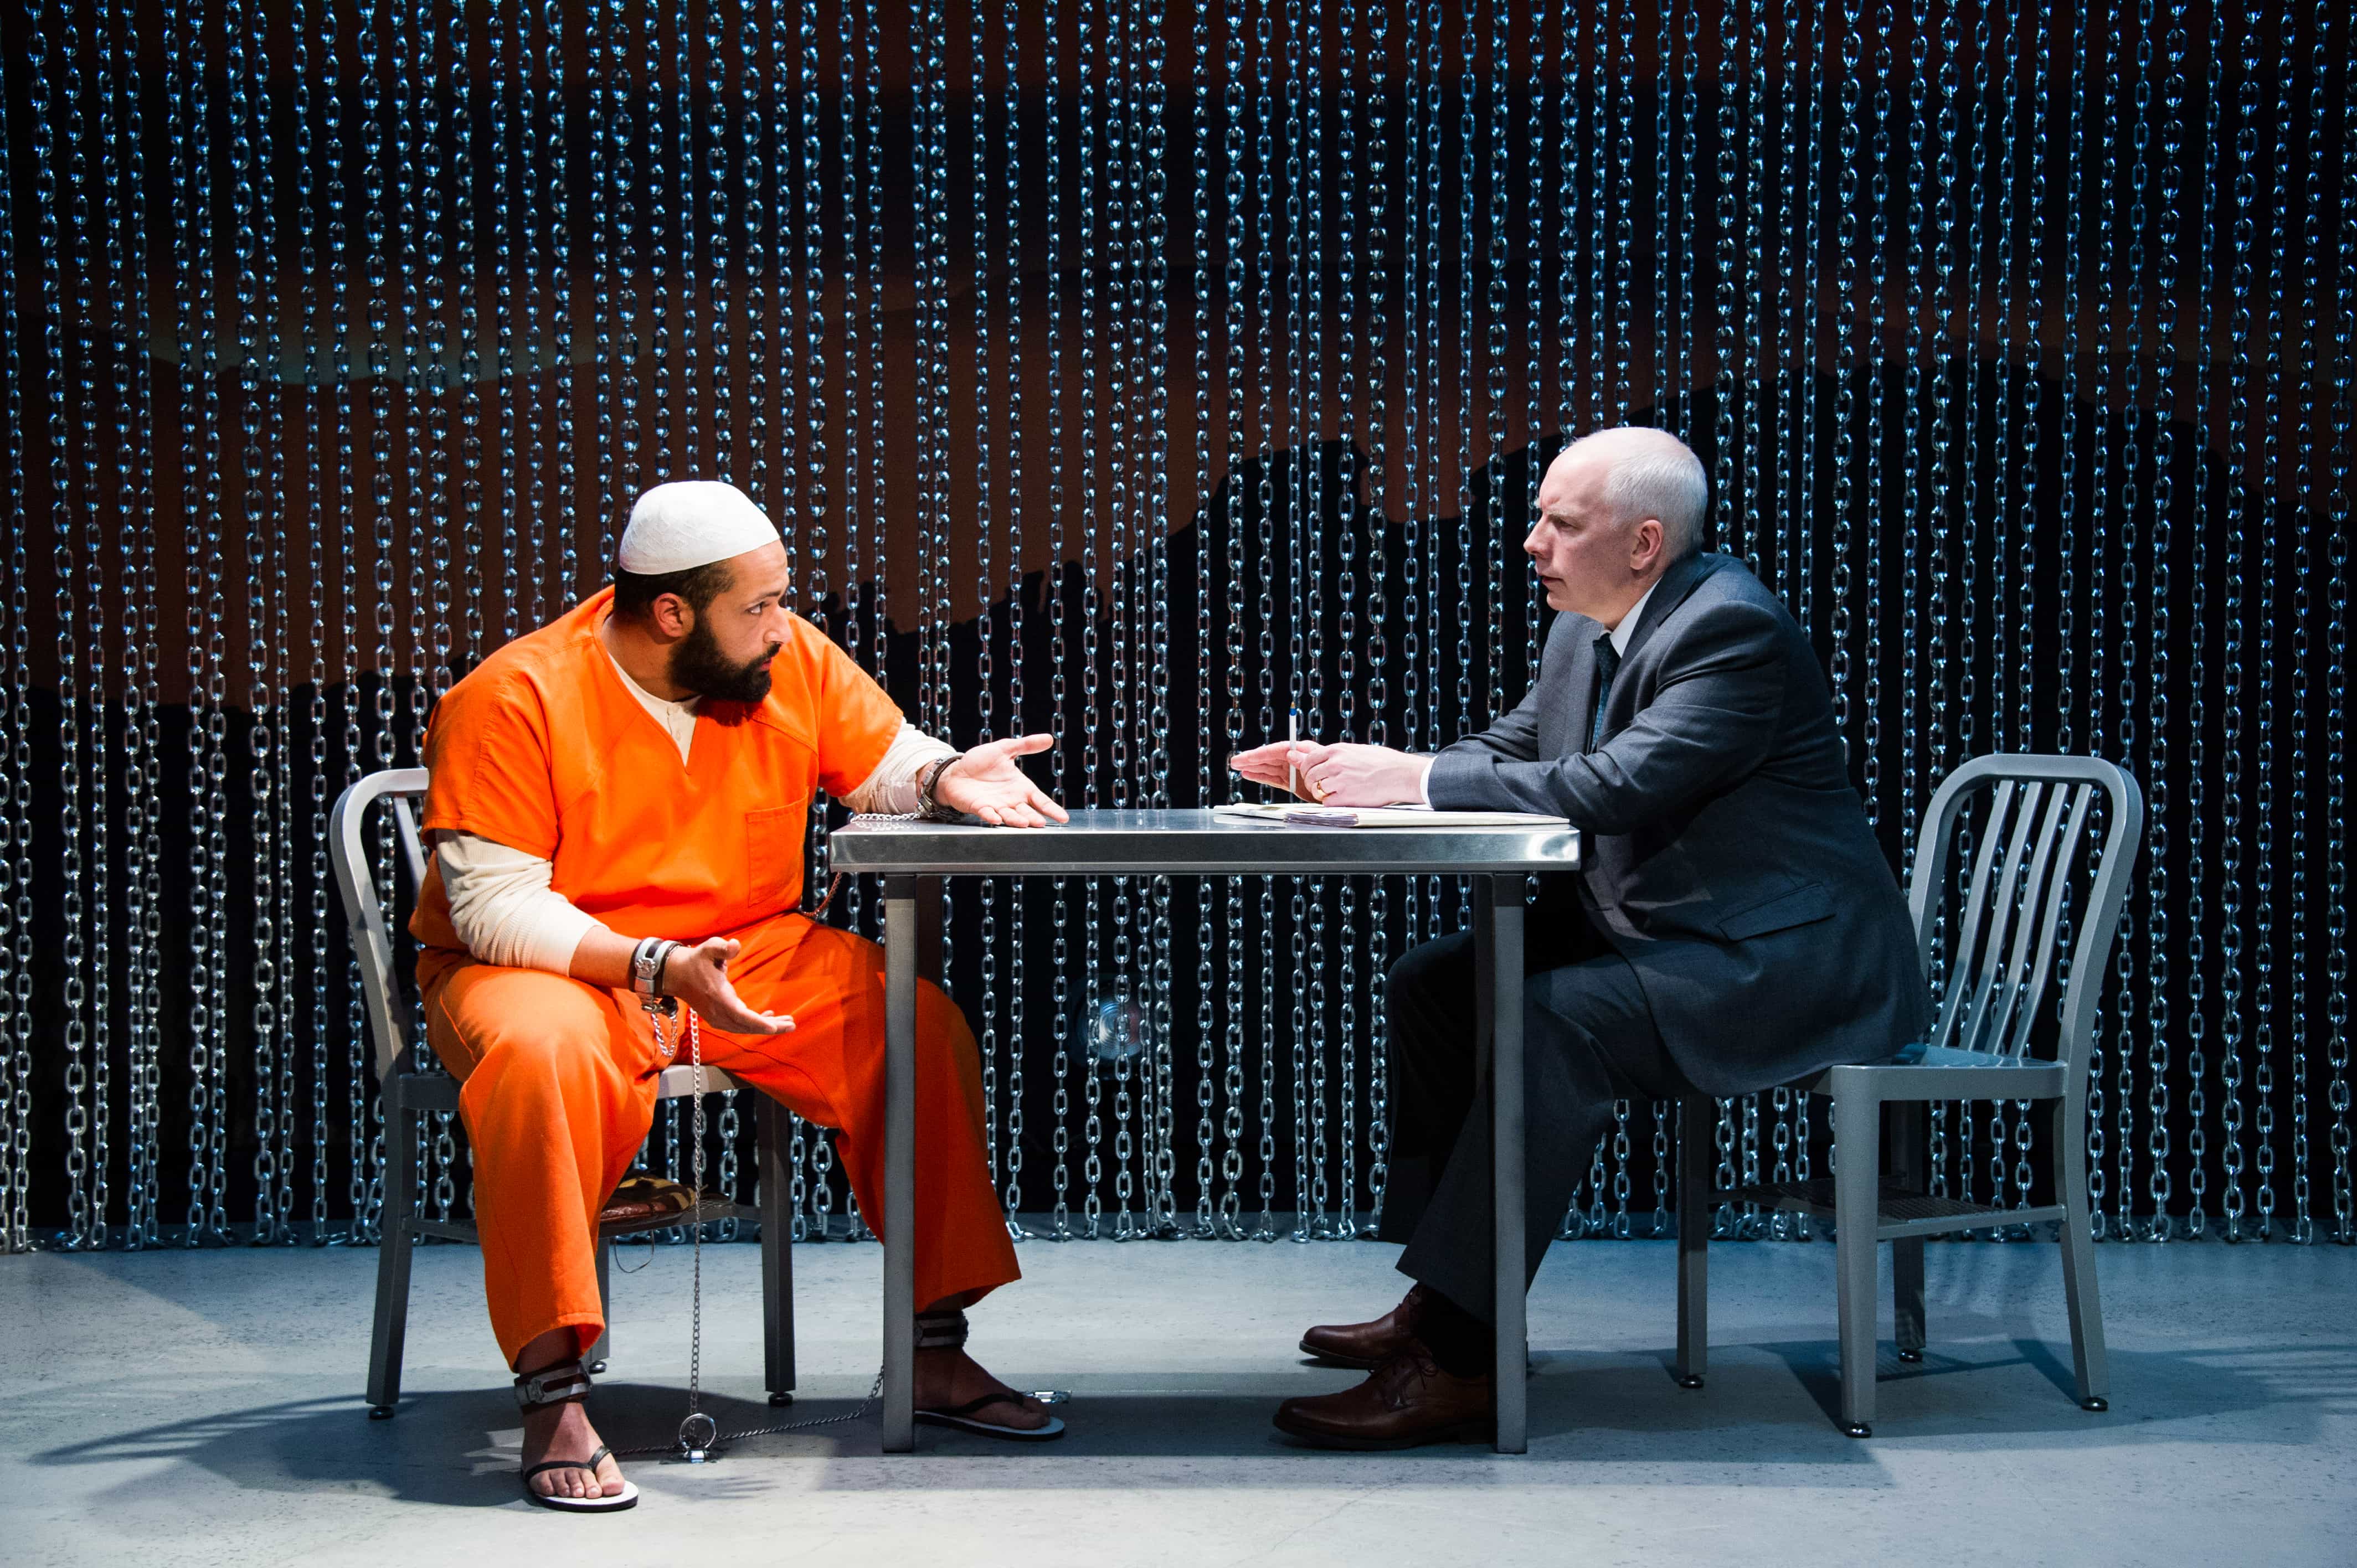 Ahmad Kamal (Malik) and MJ Casey (Bud Abramson) in 4,380 Nights. Photo by C Stanley Photography.